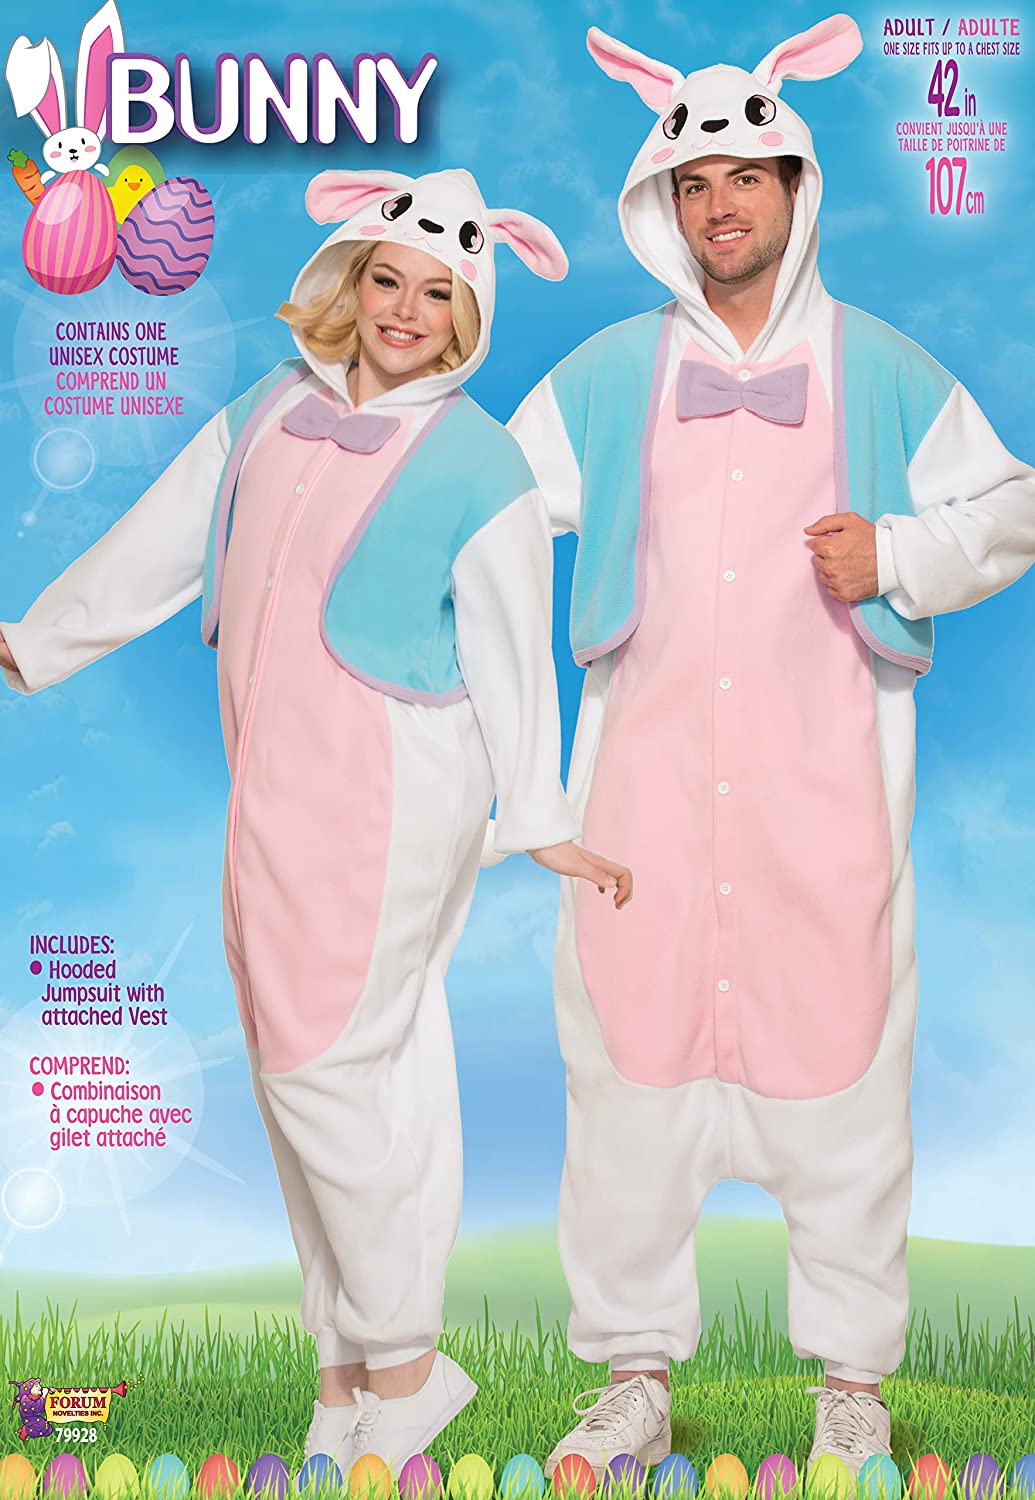 Easter Bunny Costume.